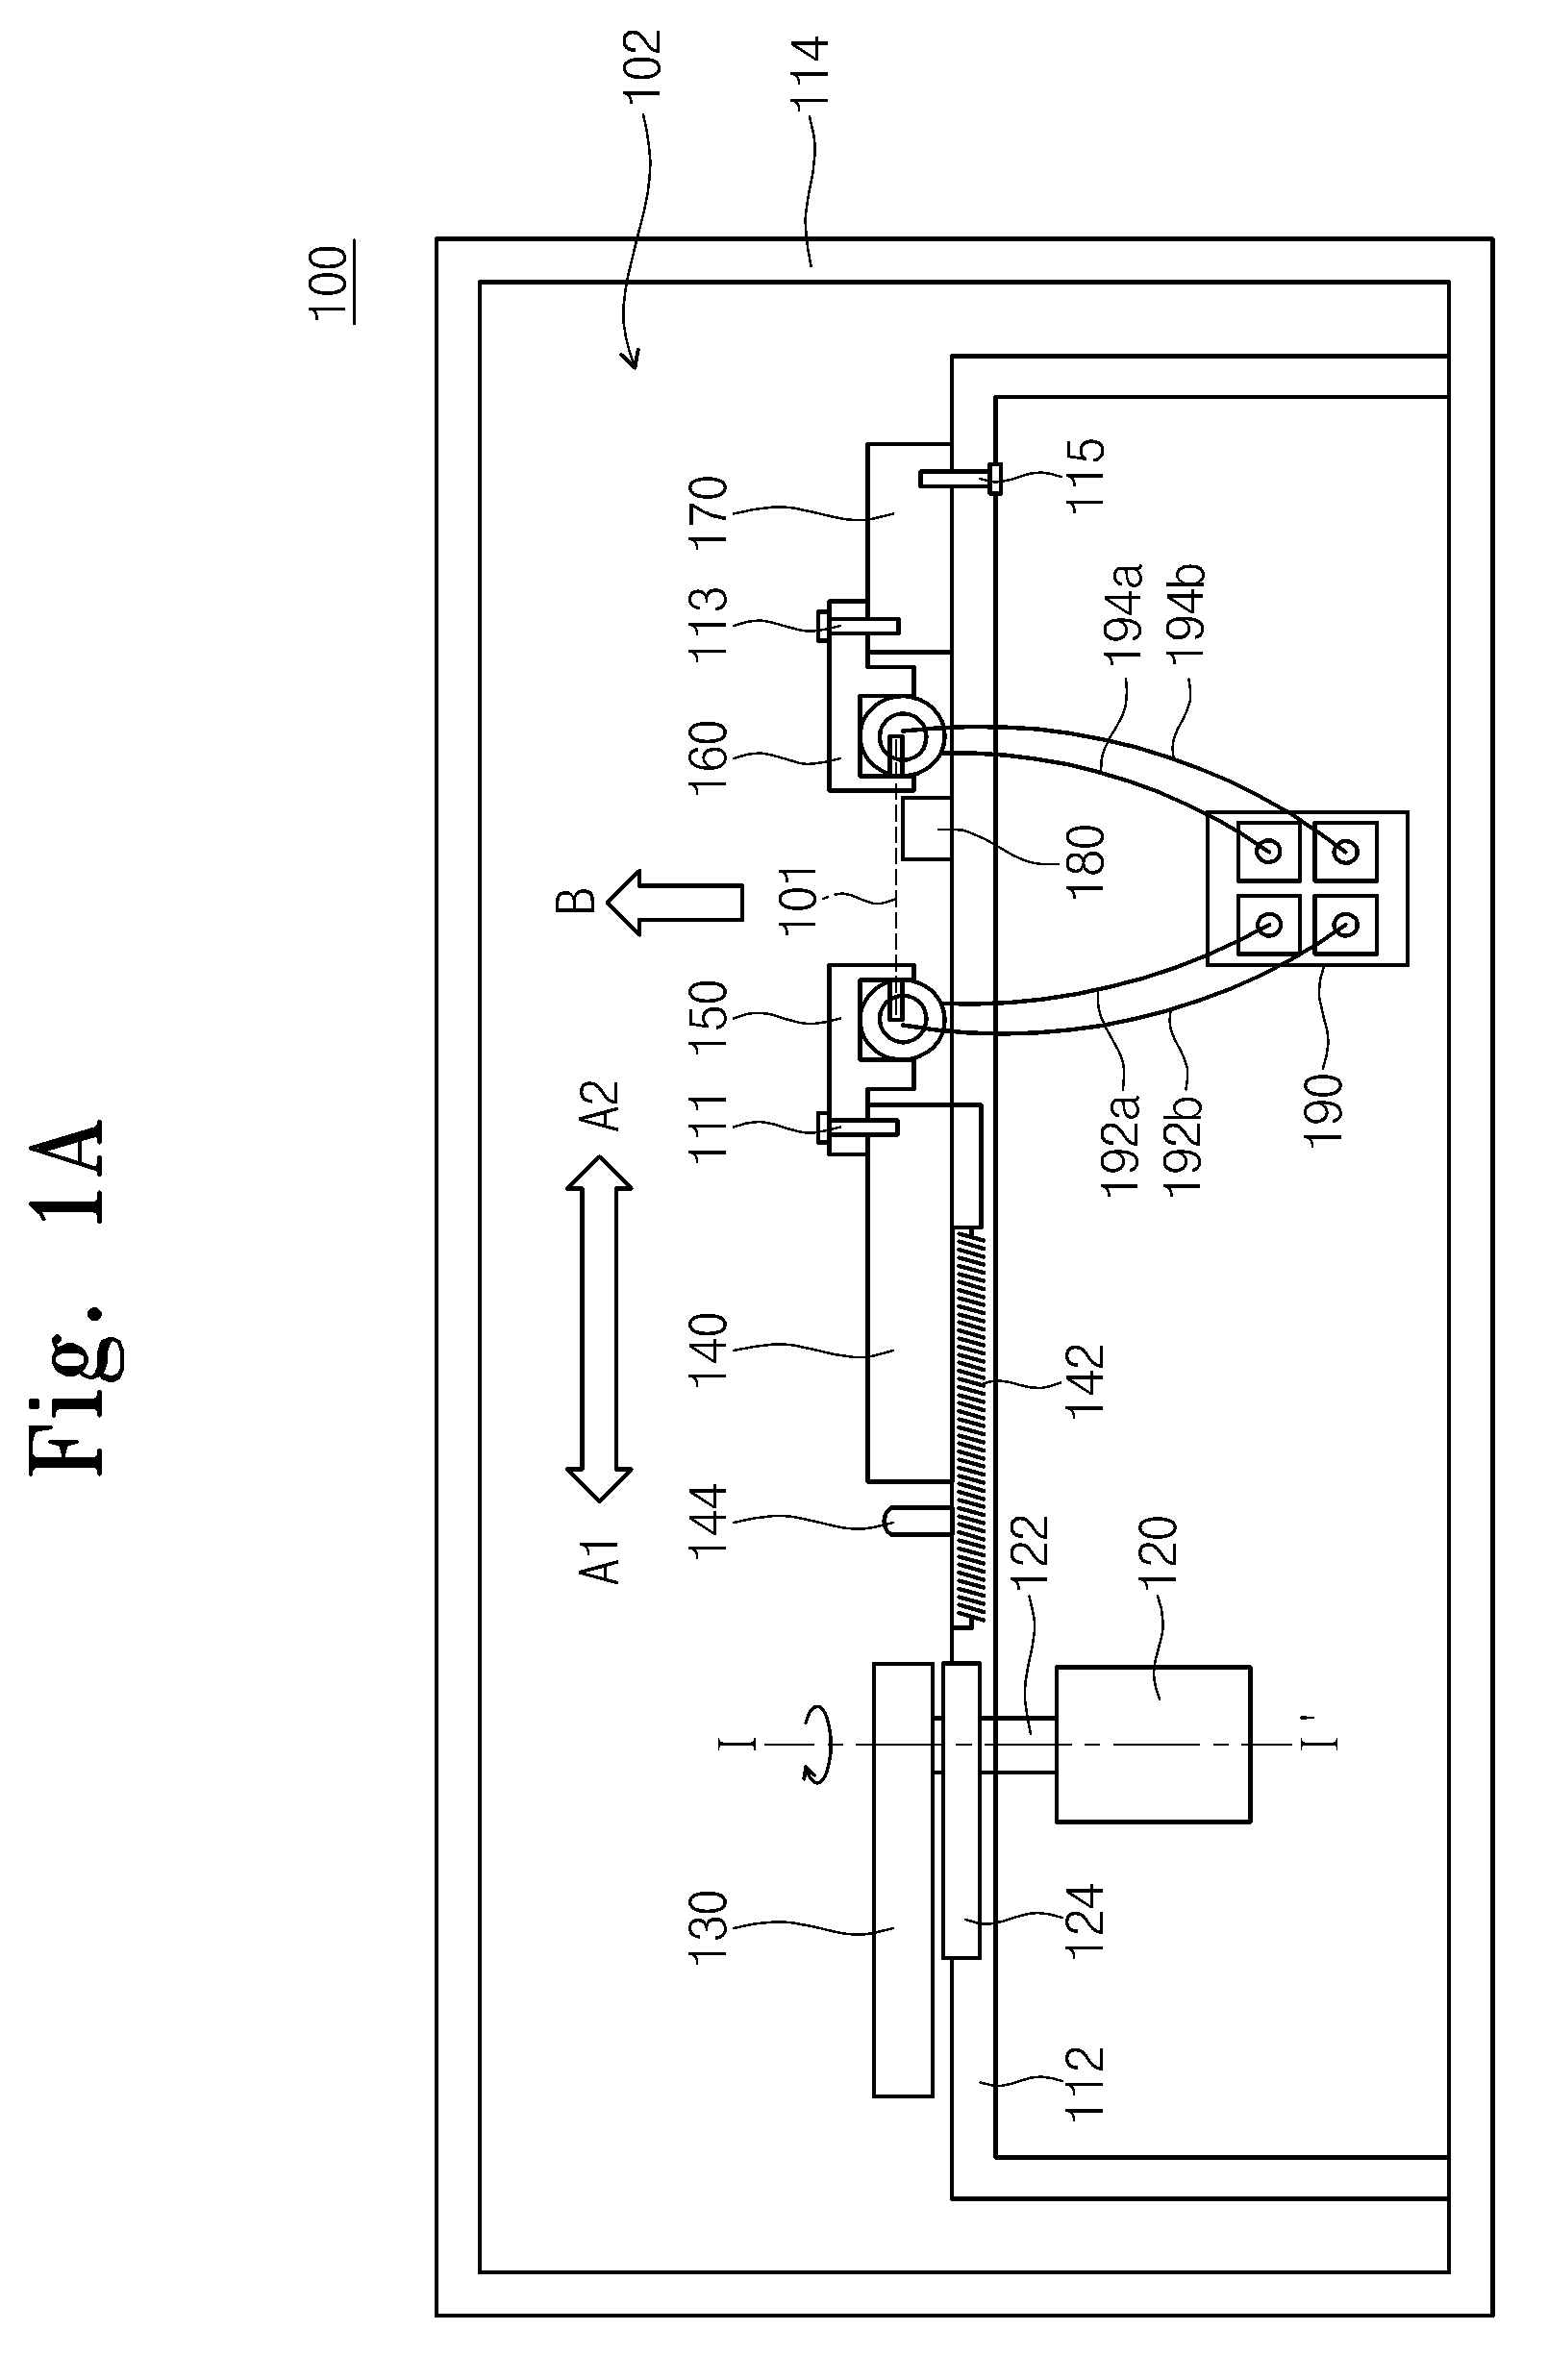 Bending test apparatus for flexible devices